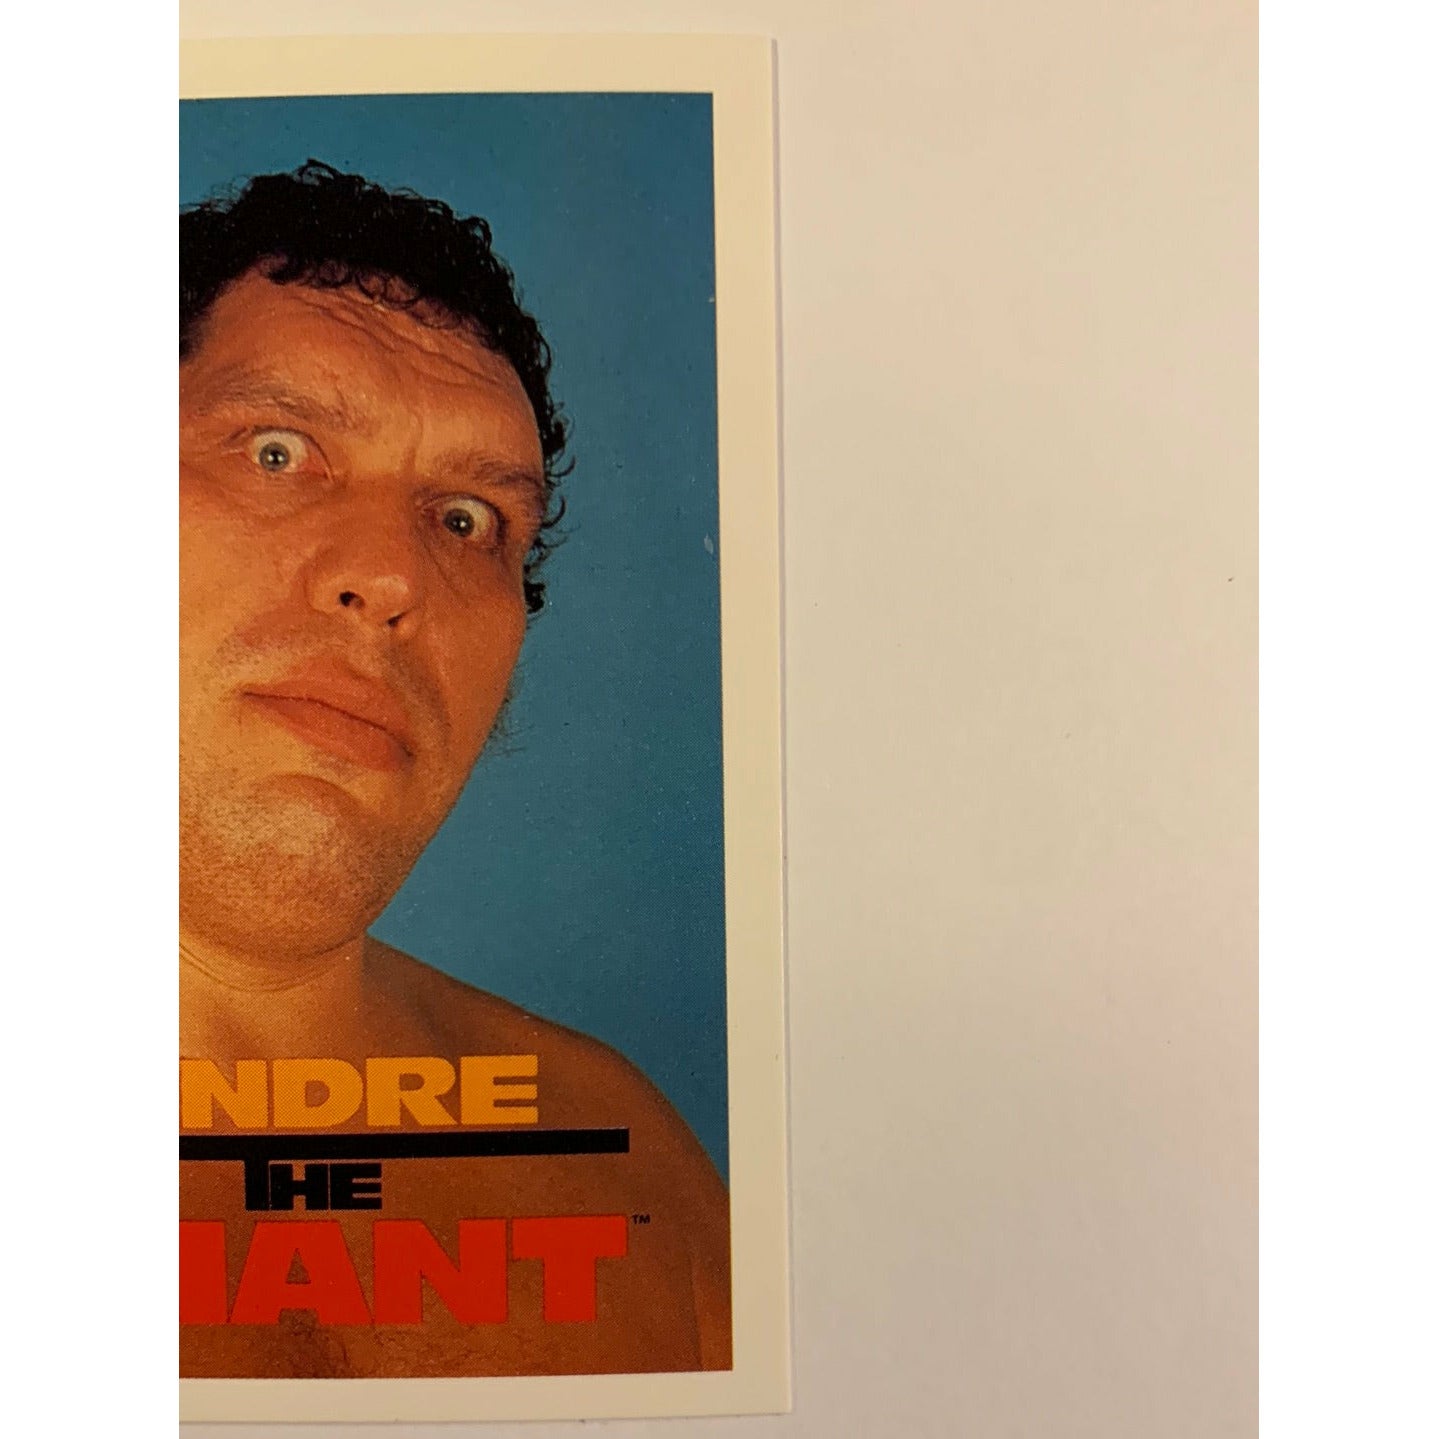 1990 Titan Sports André The Giant